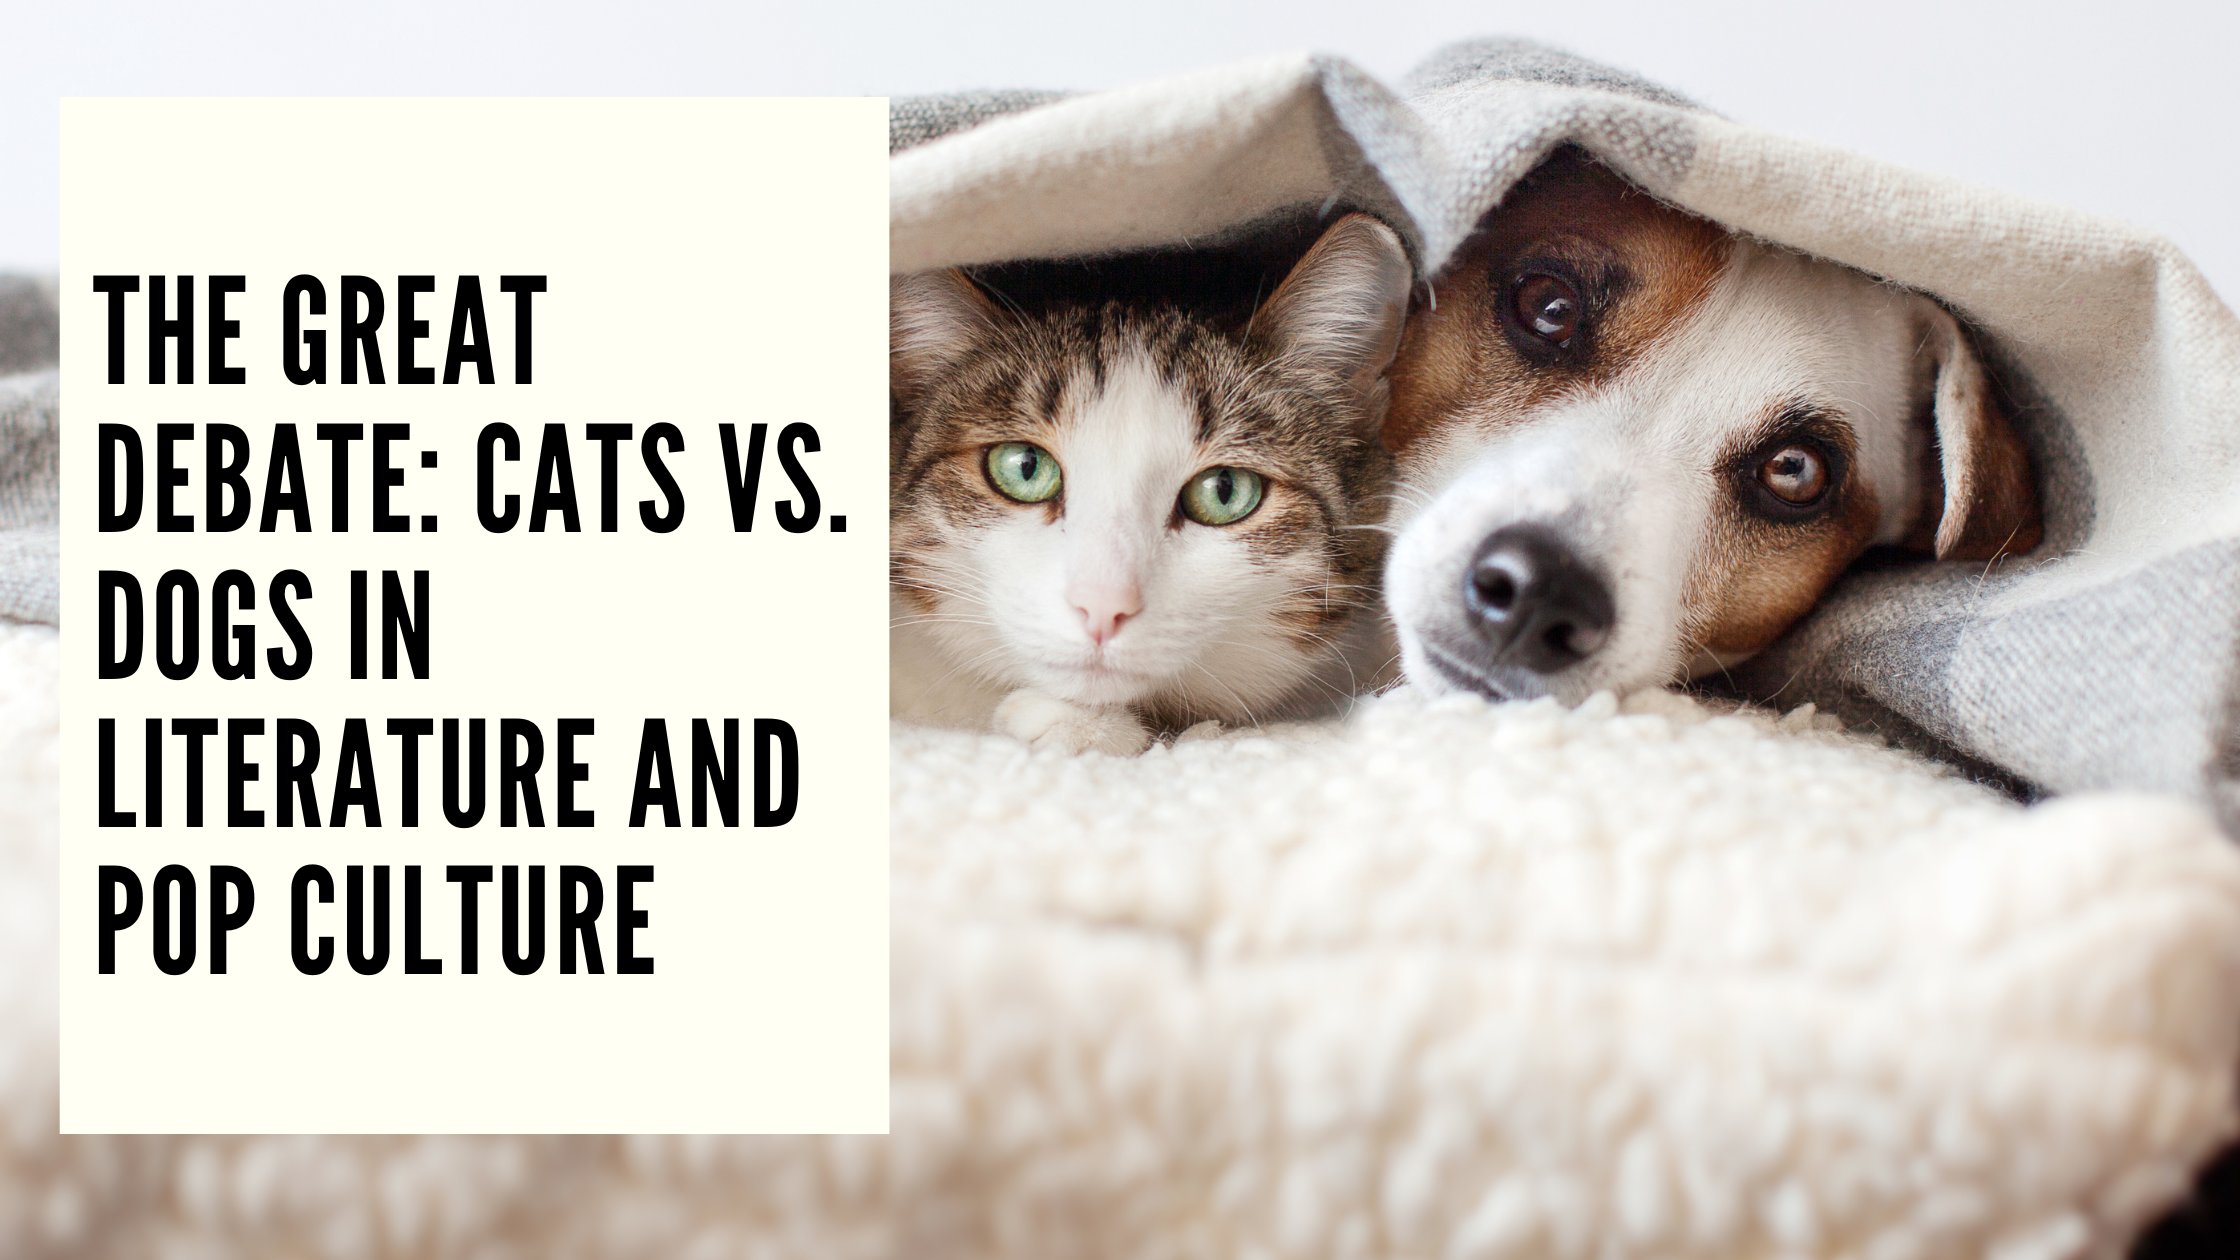 The Great Debate Cats vs. Dogs in Literature and Pop Culture